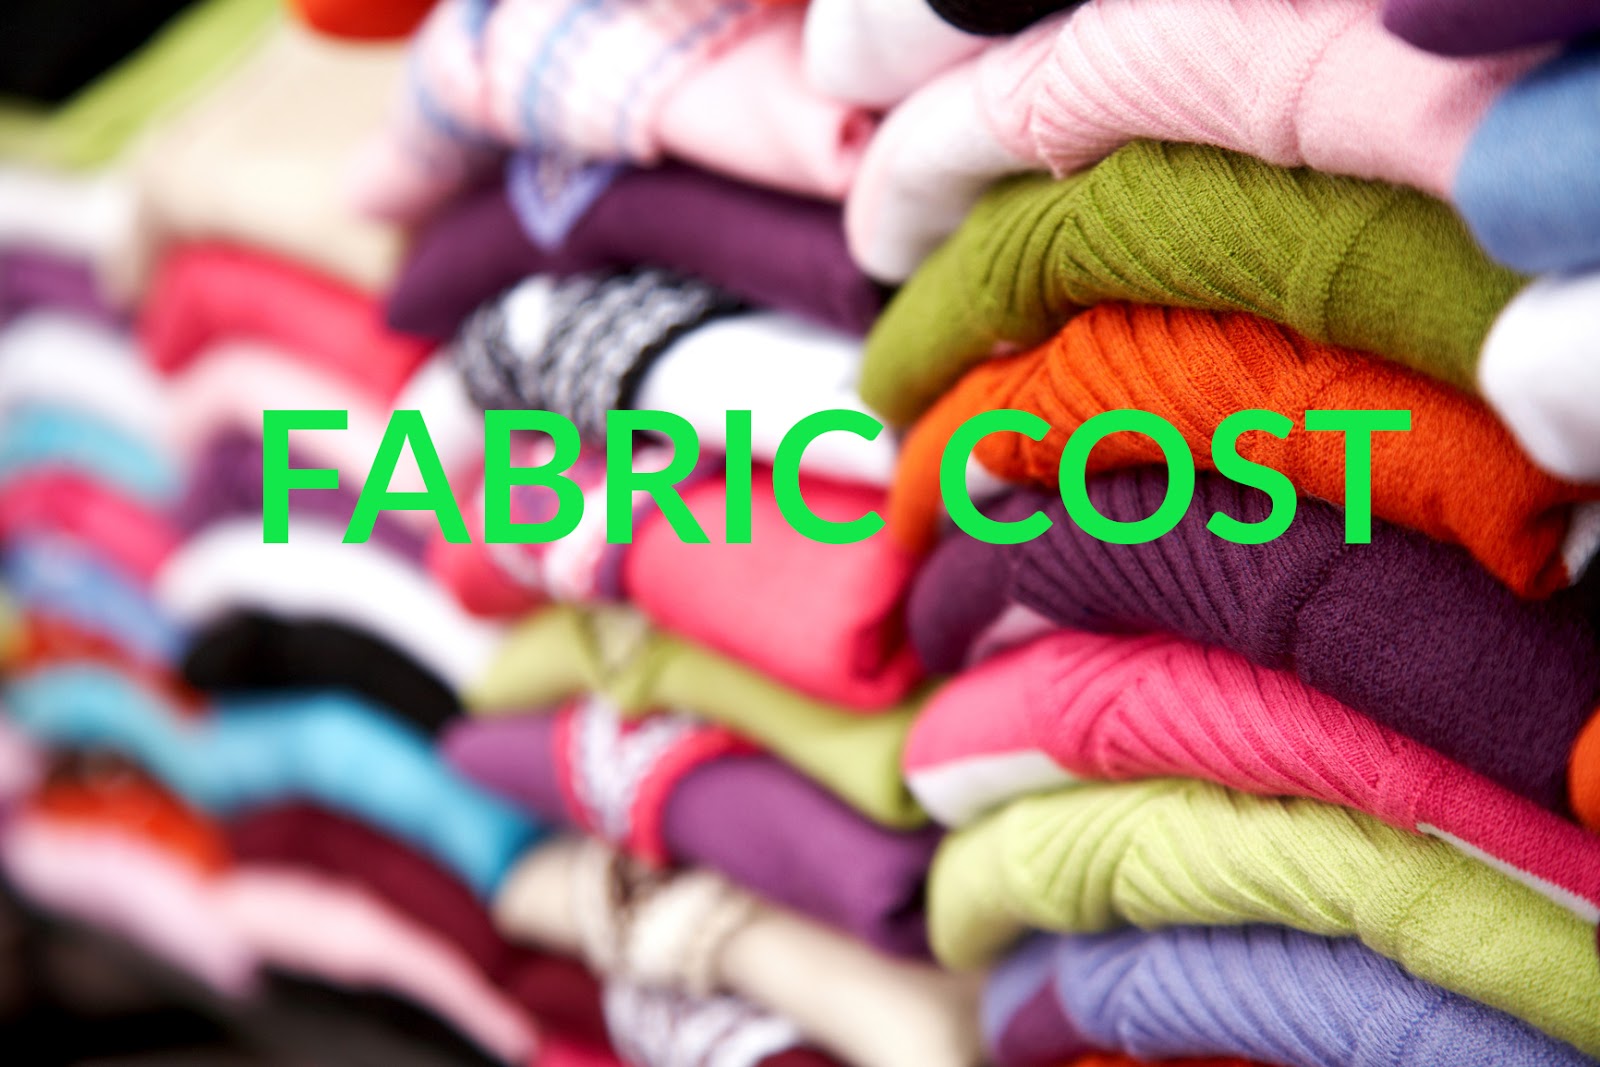 Fabric costing | Costing calculation of knitting and colored Fabric